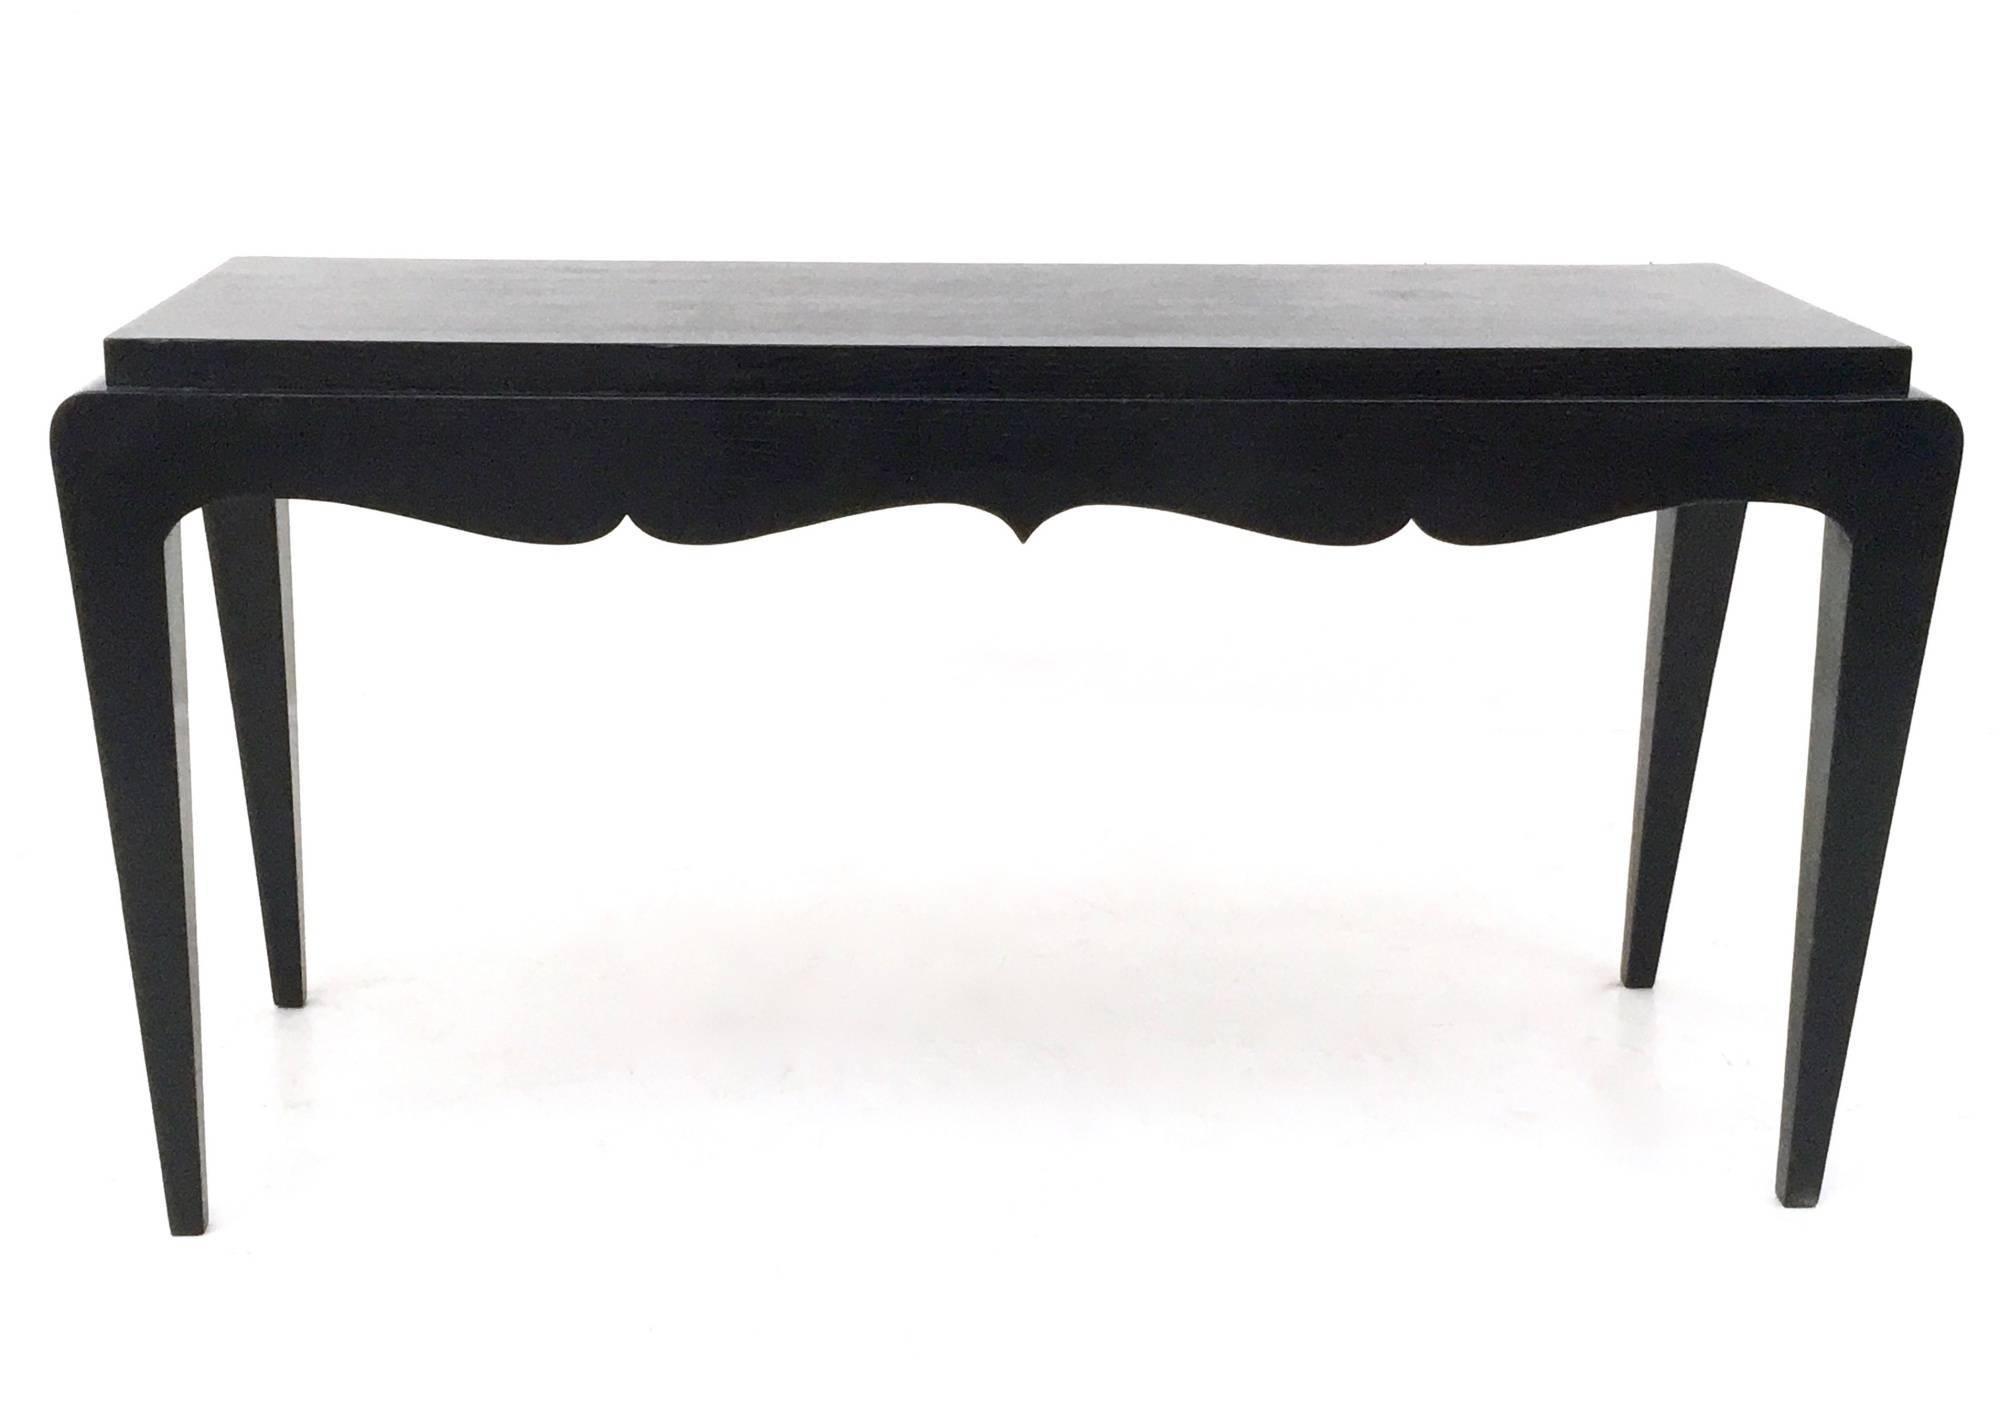 Vintage Black Lacquered Durmast Oak Bench, Italy In Excellent Condition For Sale In Bresso, Lombardy